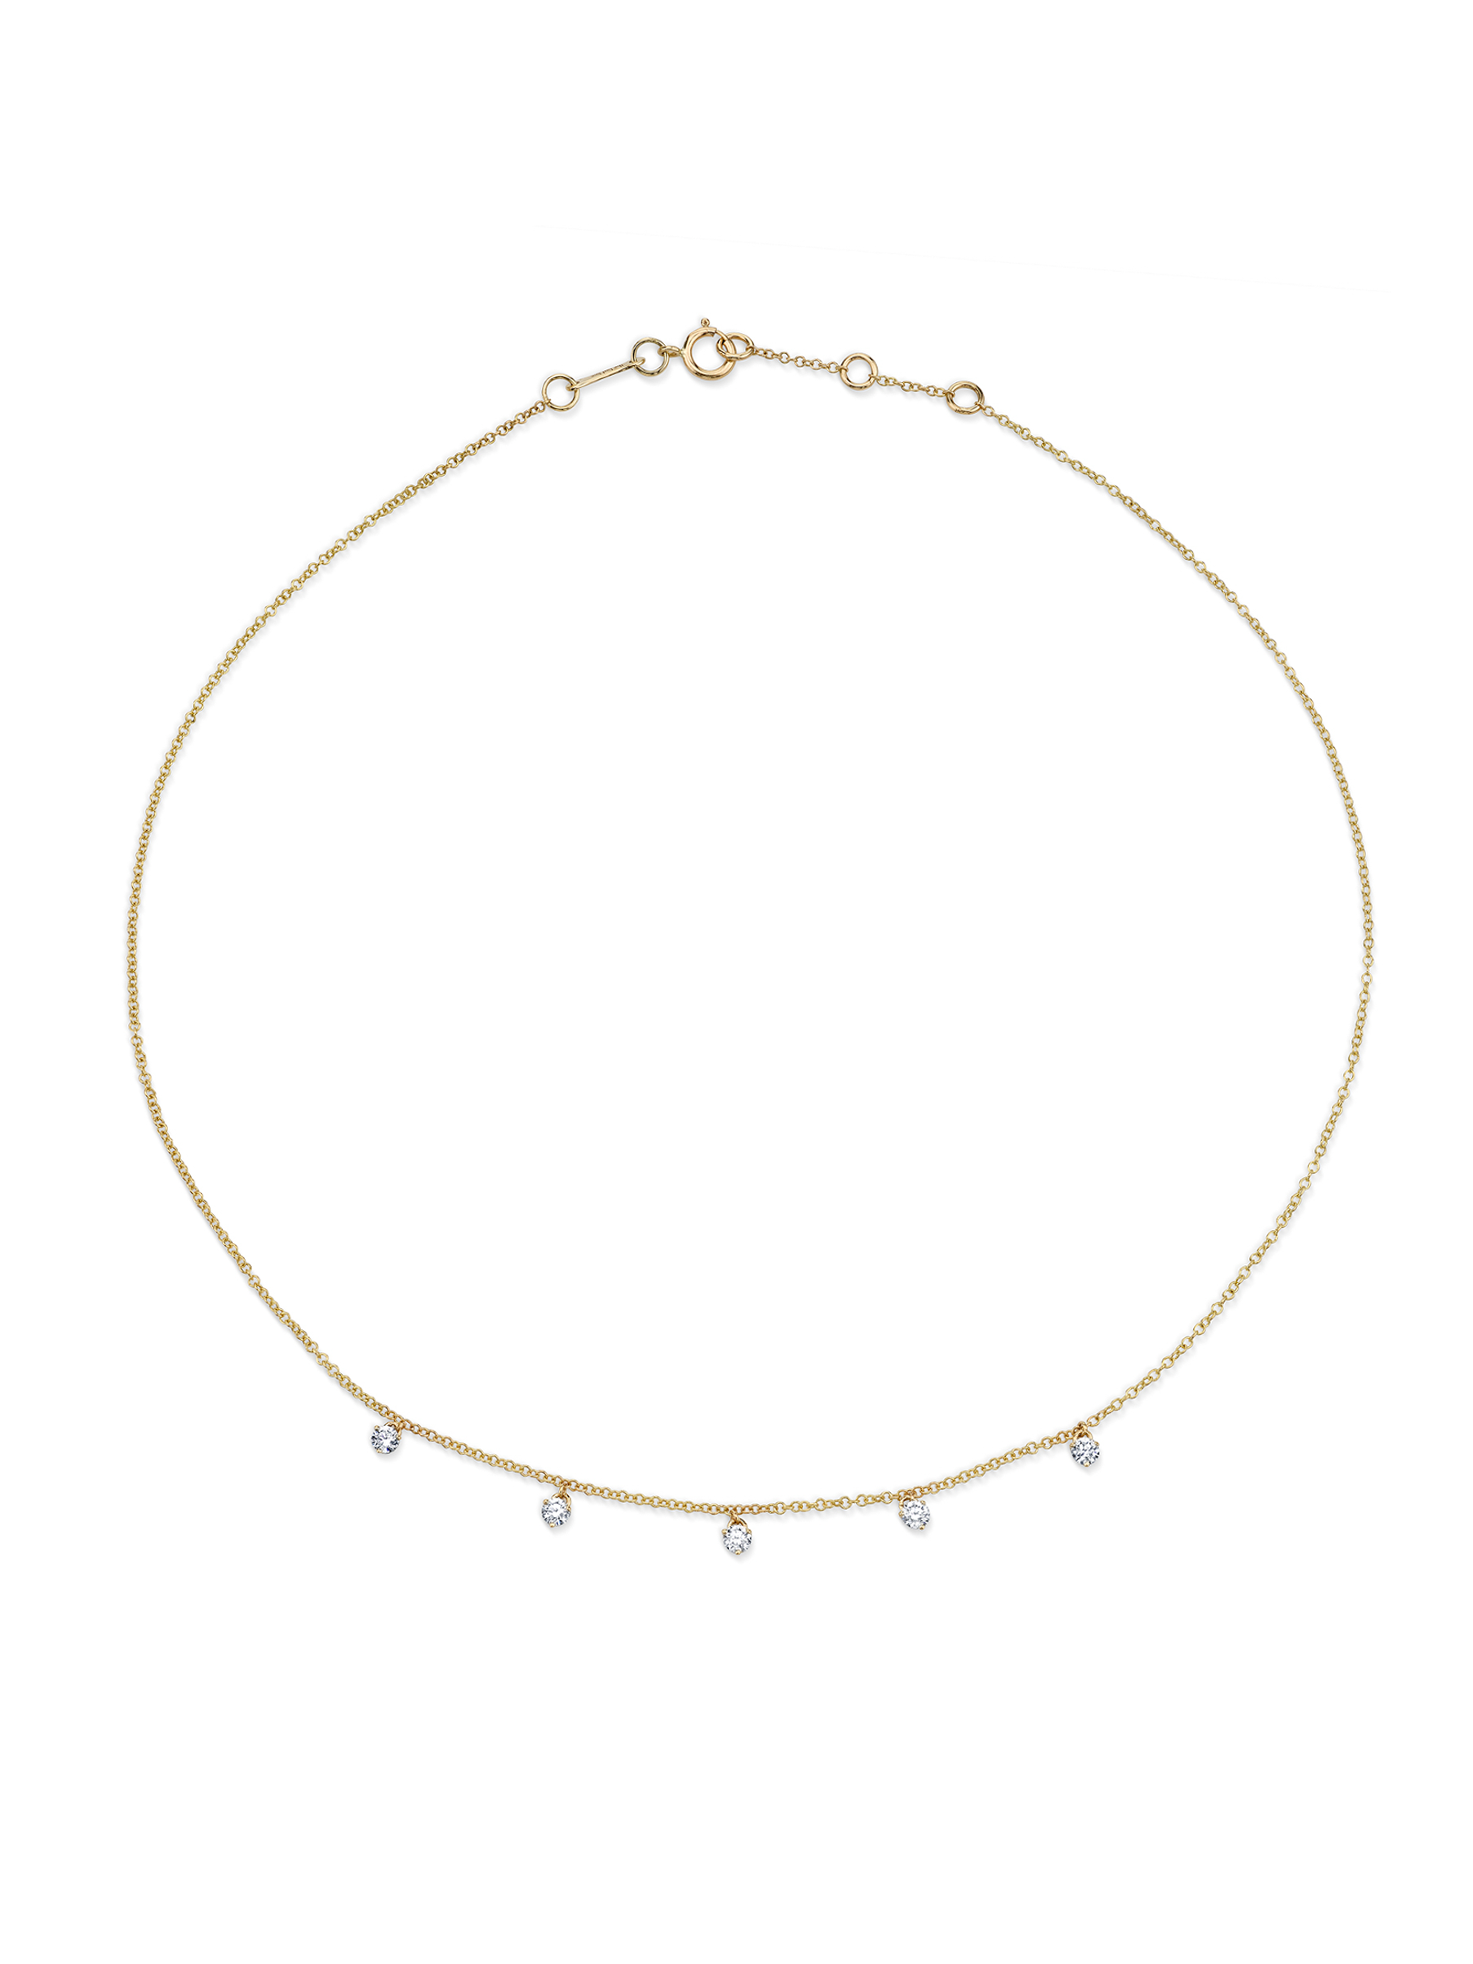 Five Solitaire Necklace - White Diamond / 14k Yellow Gold – The Last Line